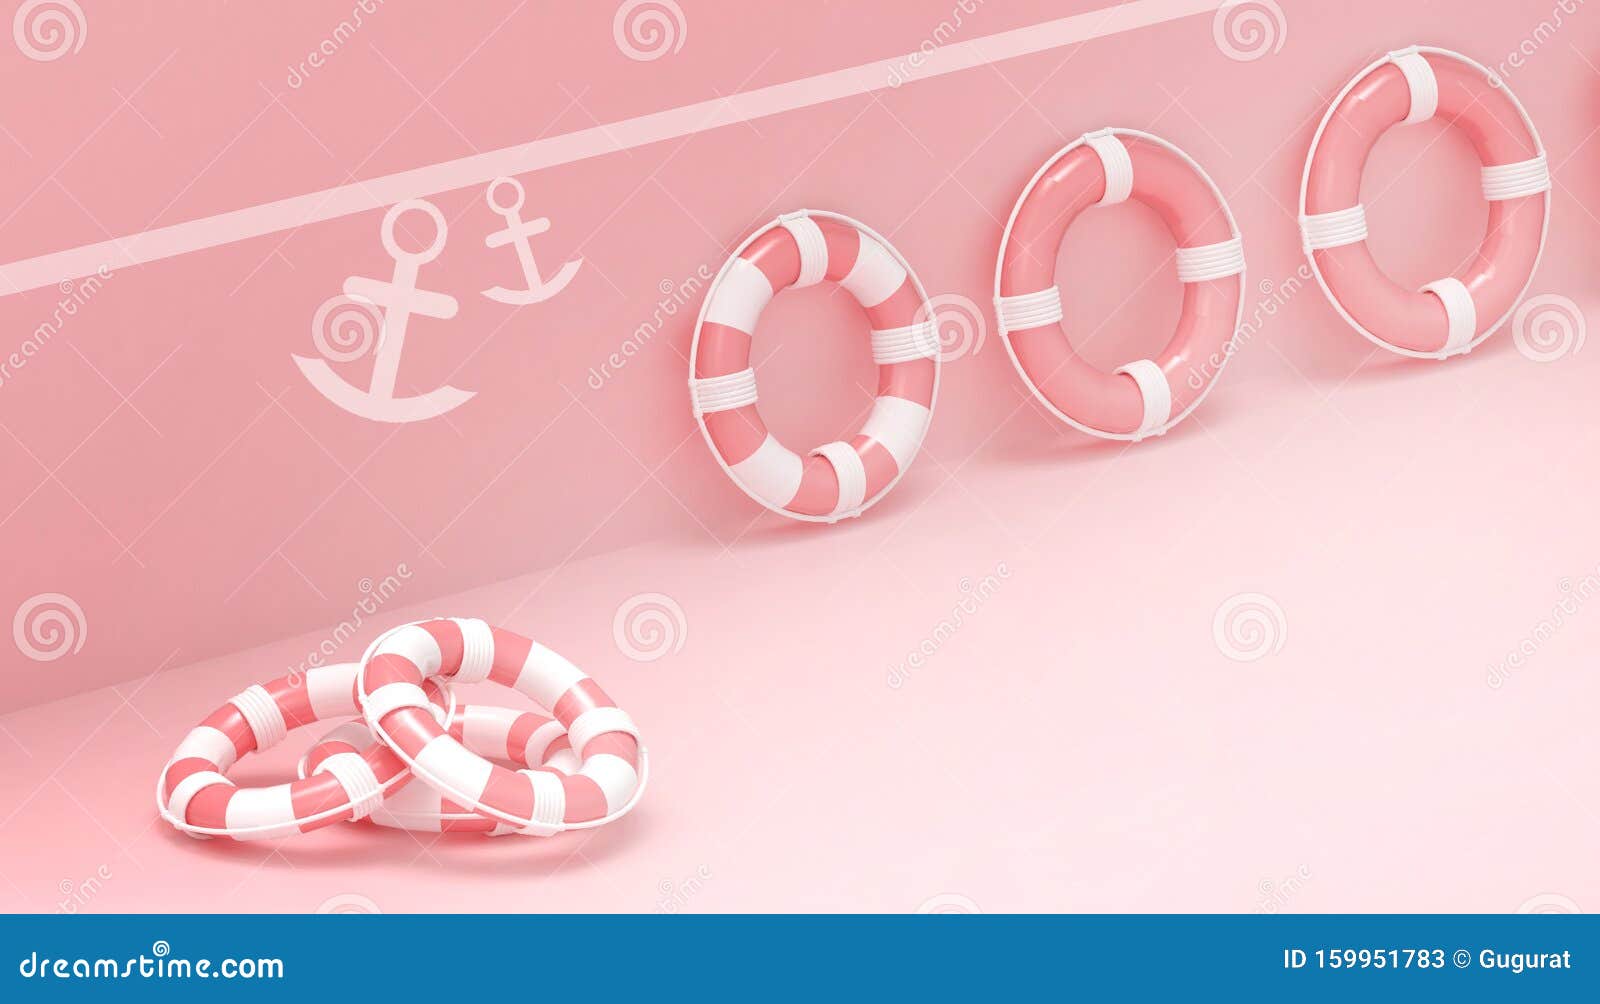 lifebuoy and anchor summer holidays creative concept ,salvavidas,help, safety, security,life buoy on pink pastel background